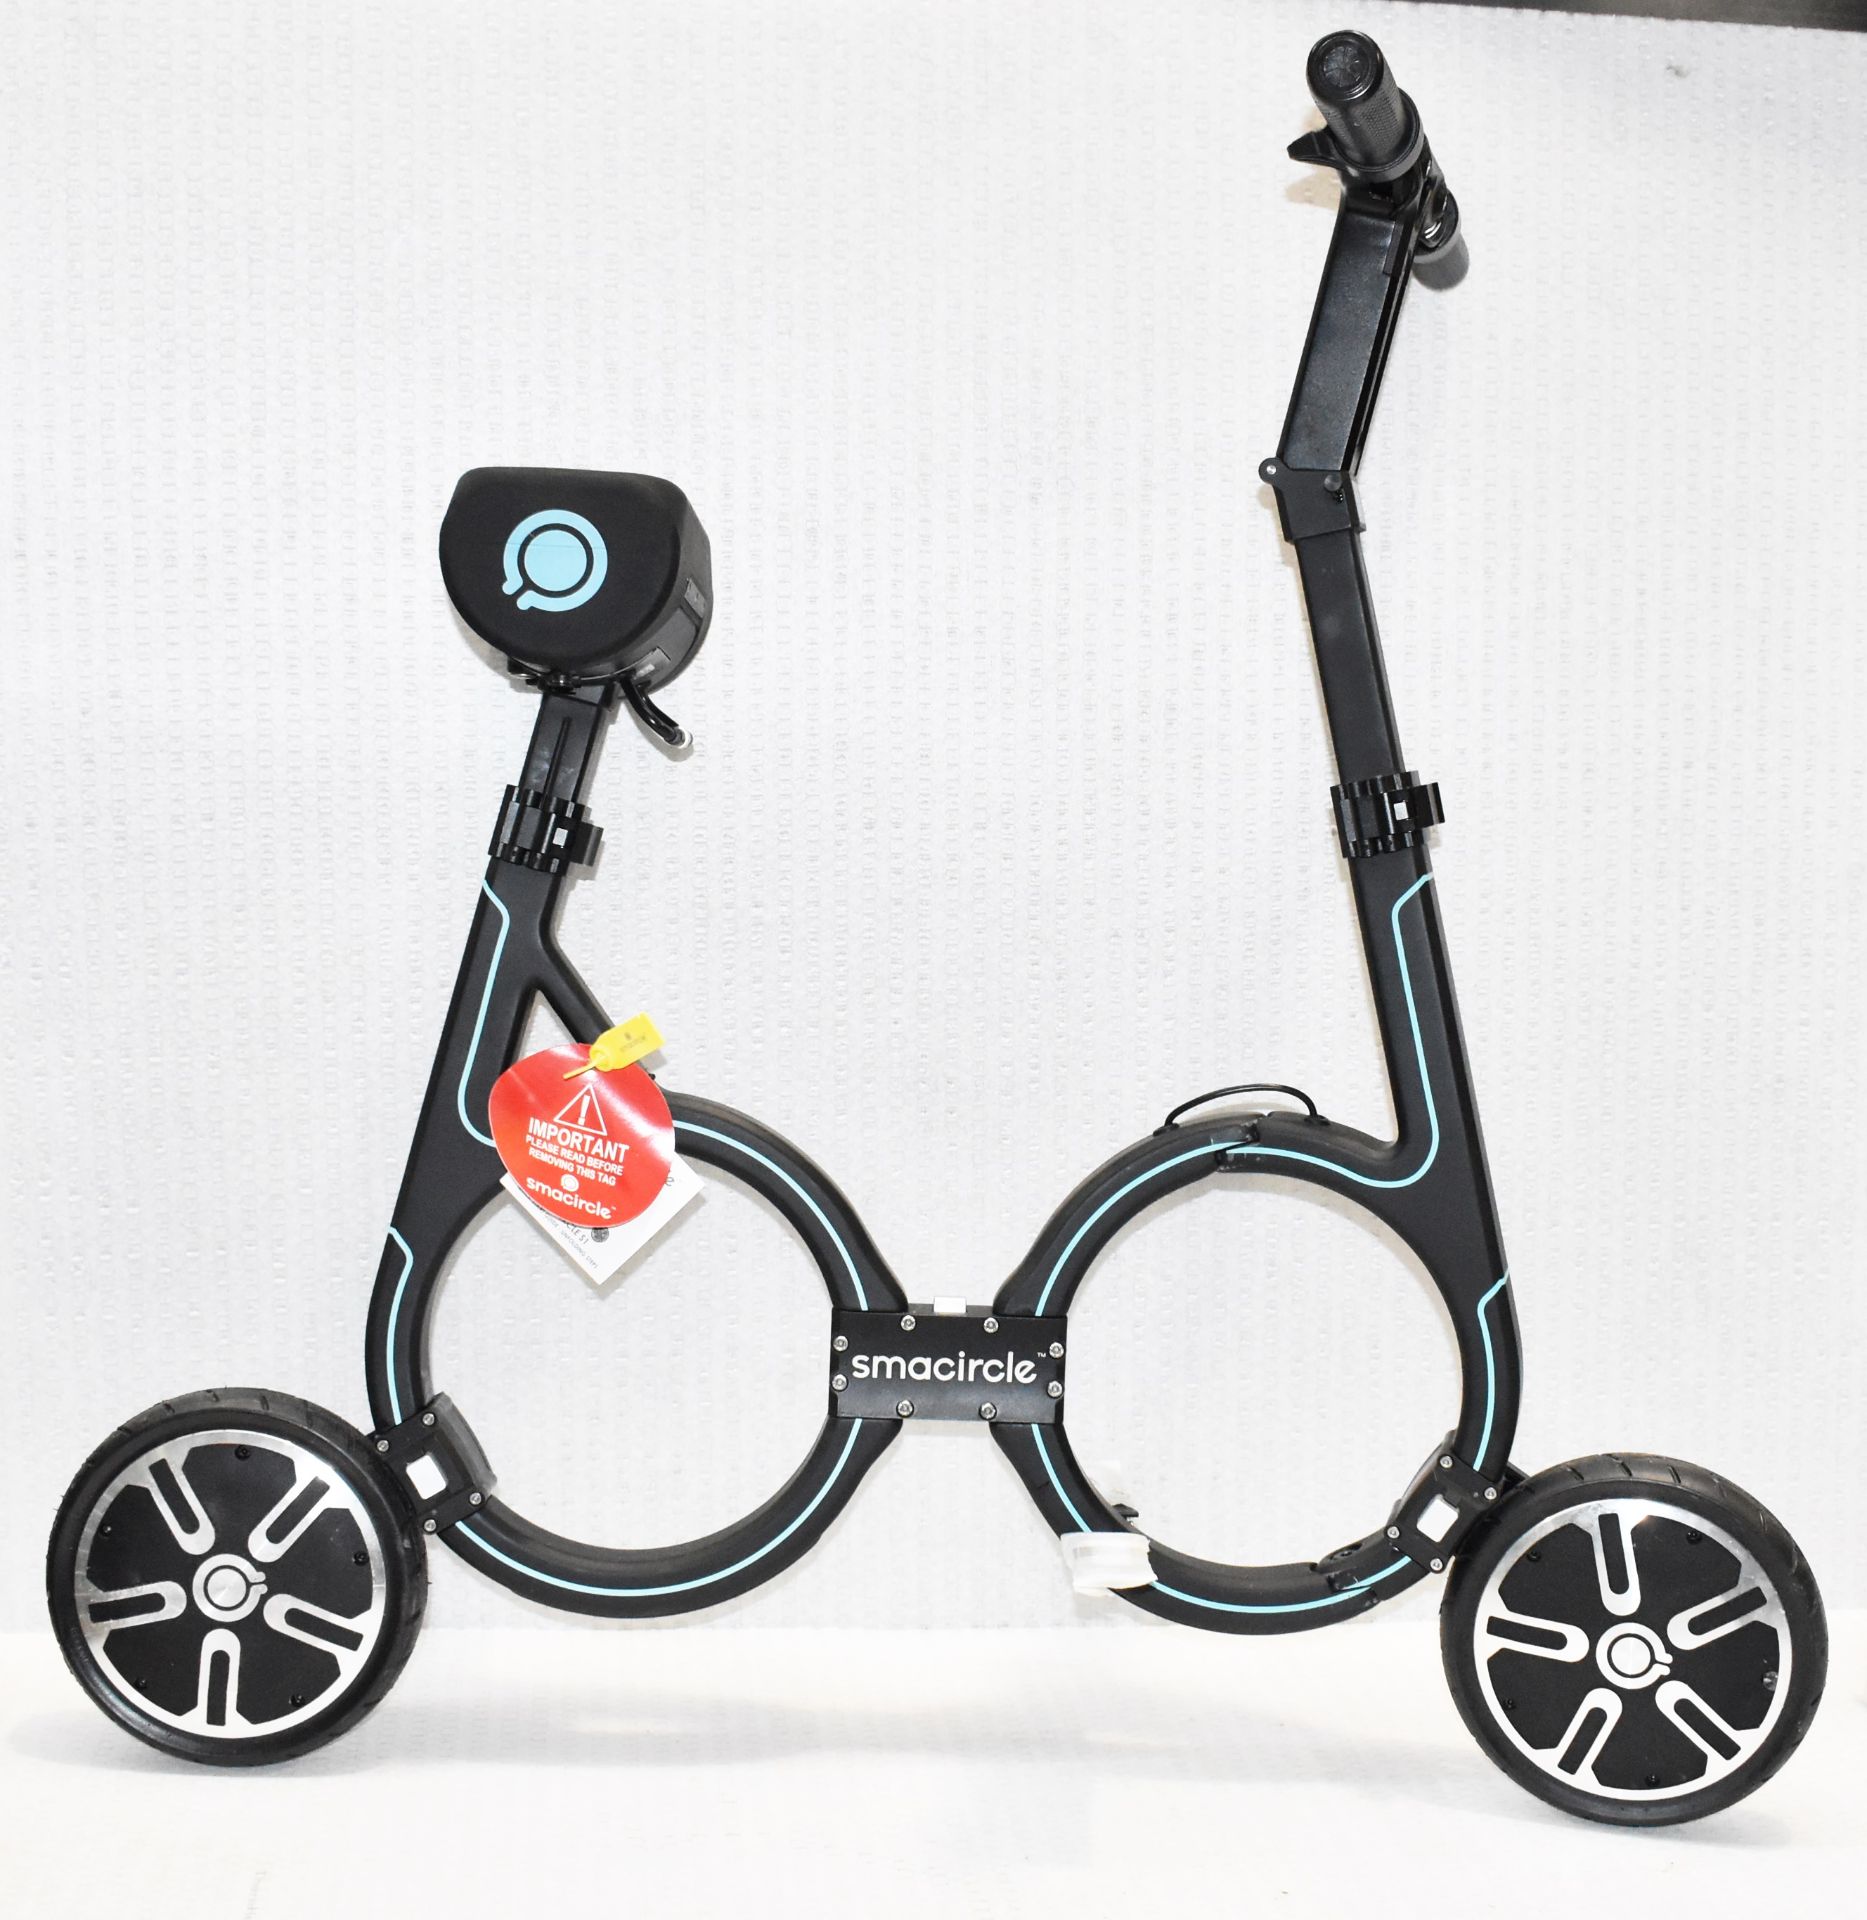 1 x SMACIRCLE S1 Super Compact Foldable Electric Bike - Original RRP £1,299 - Boxed with Accessories - Image 3 of 12